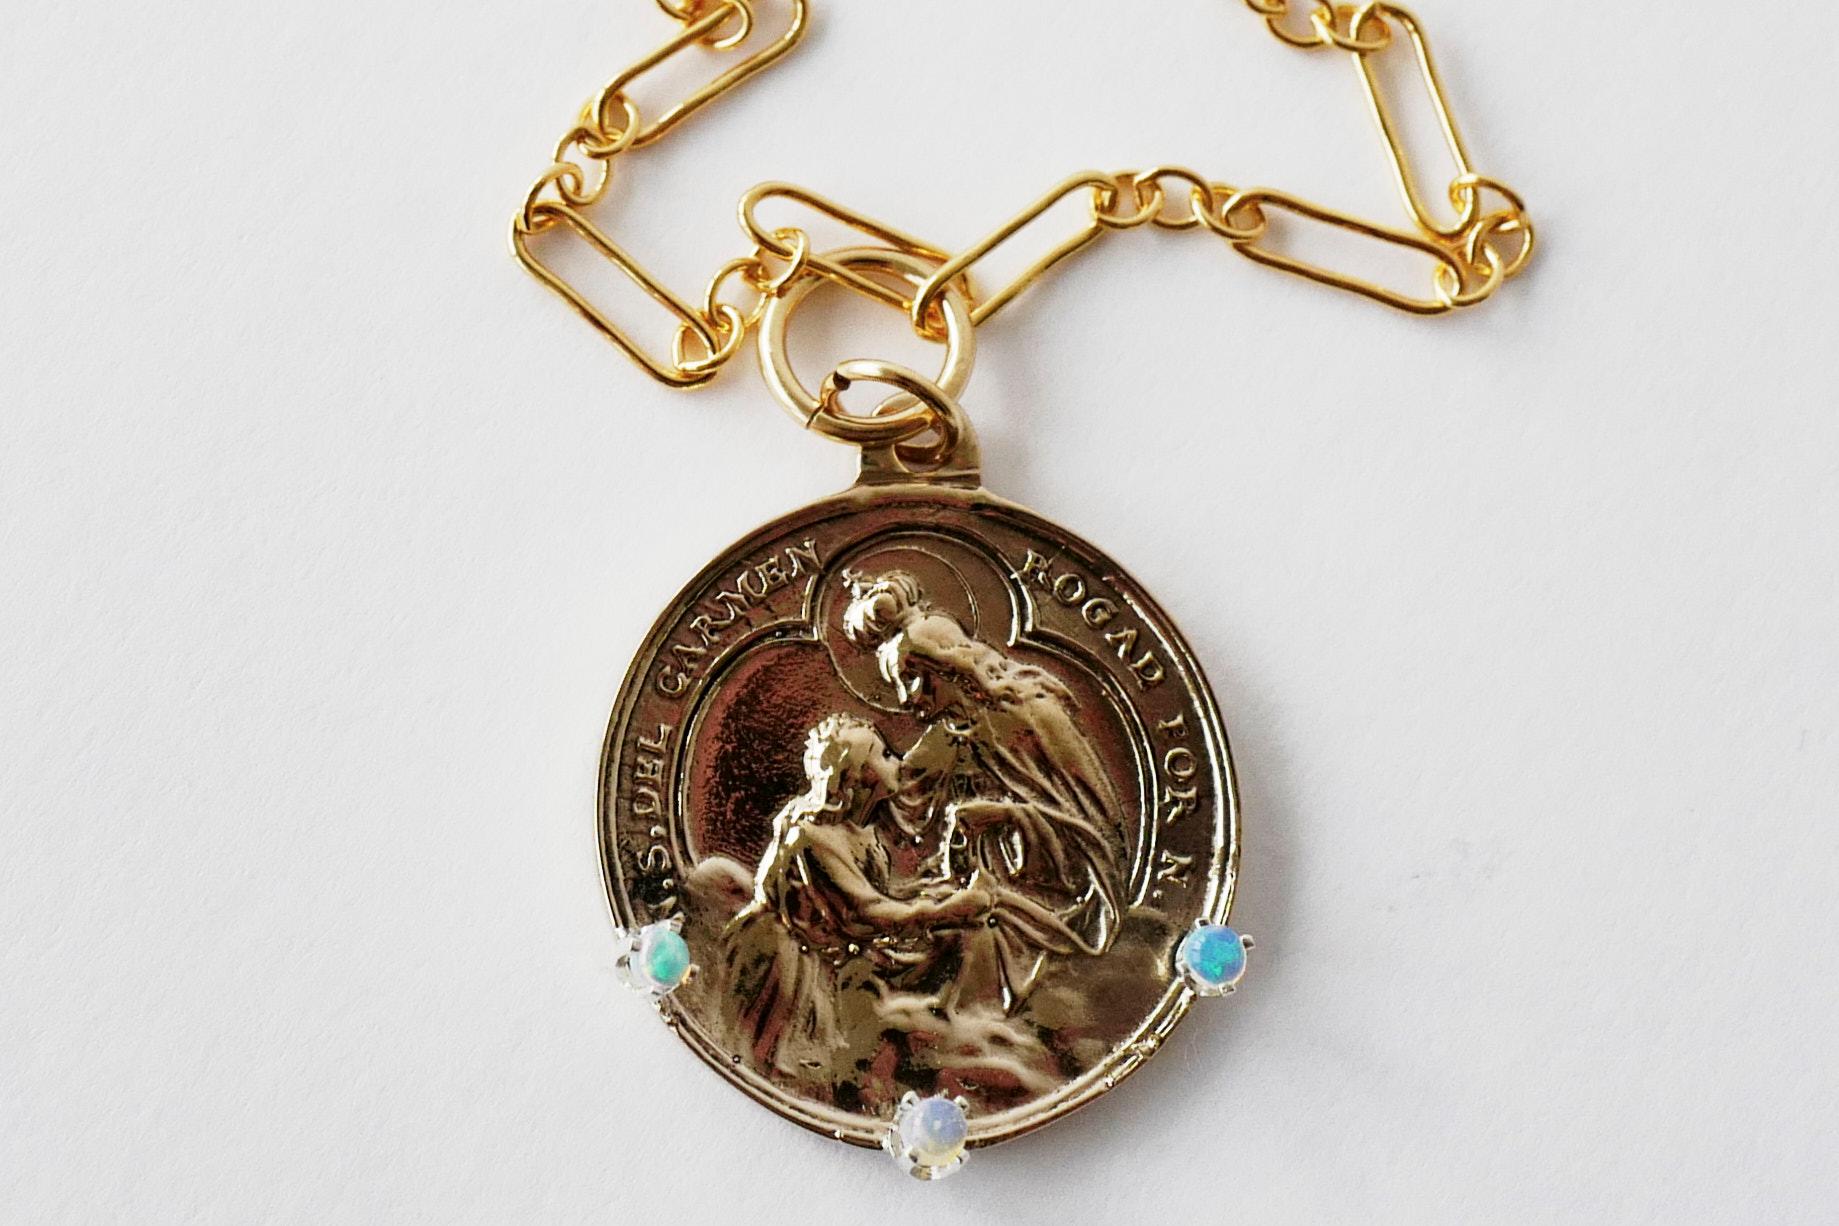 Round Cut Virgin Mary Opal Medal Necklace Chunky Chain Pendant J Dauphin For Sale